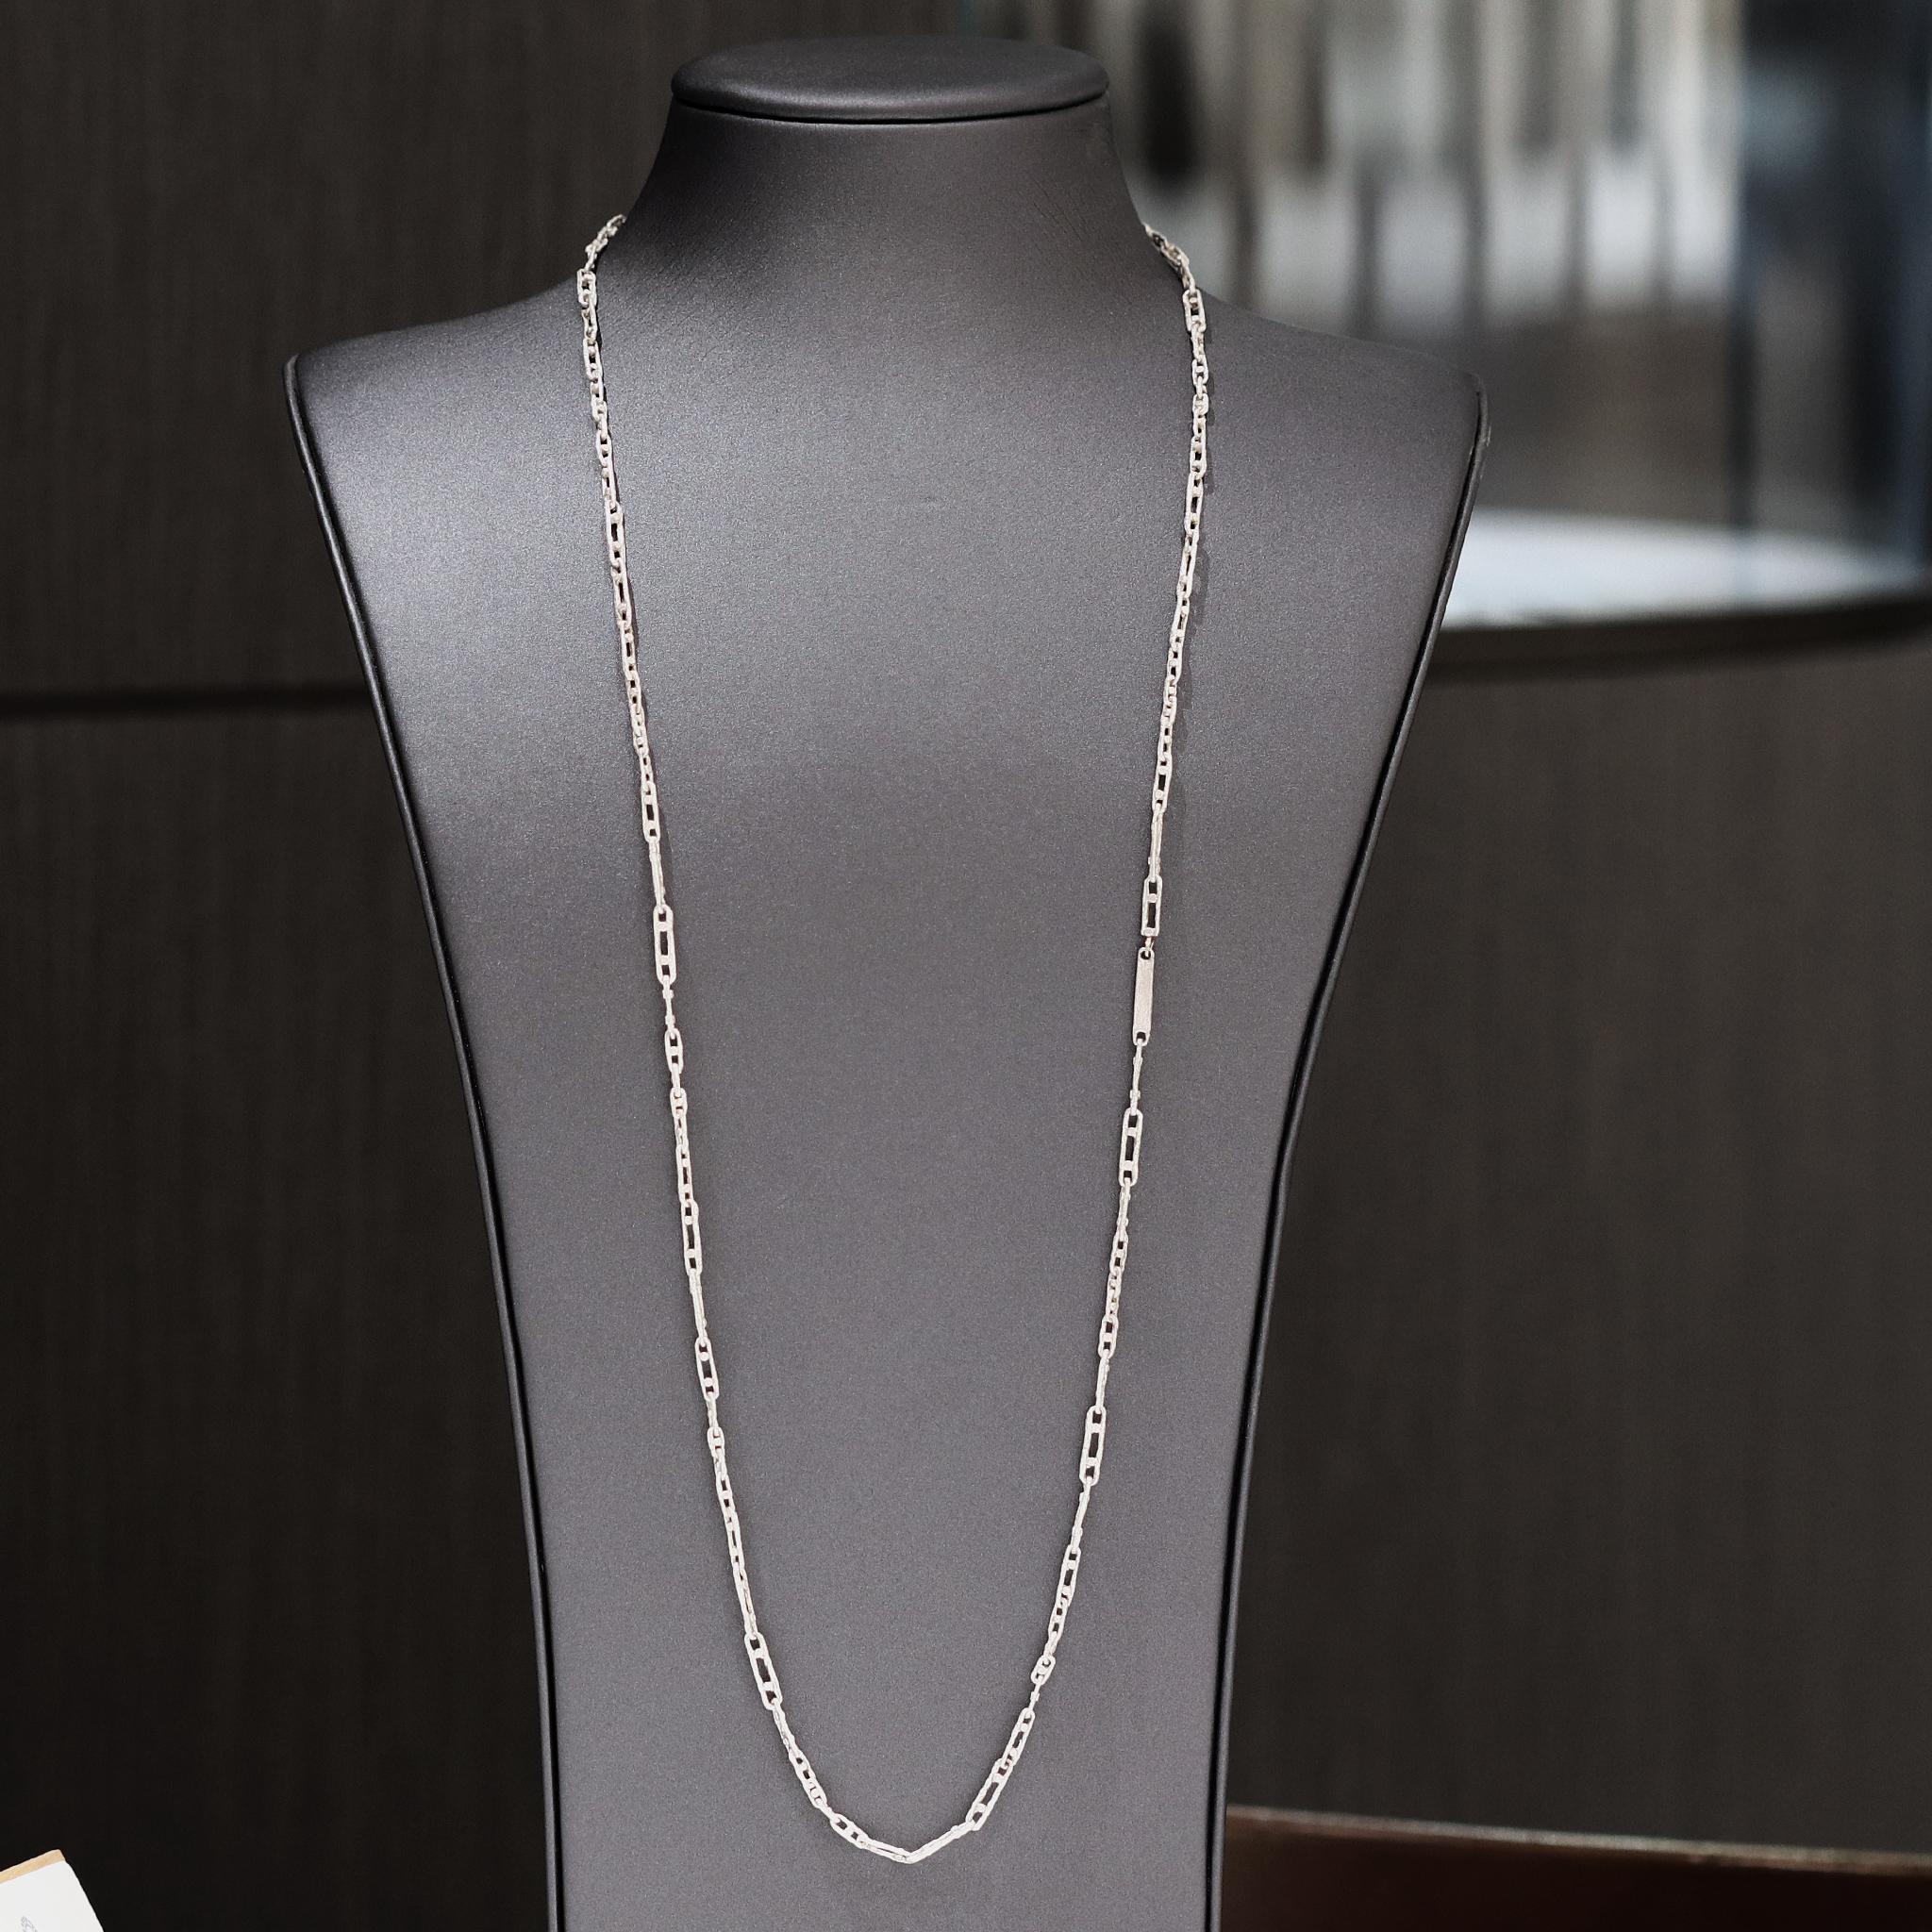 One of a kind Double Dot Links Chain by award-winning, legendary jewelry maker John Iversen, hand-fabricated in his signature, finely-textured and distinctly-toned sterling silver featuring 36 inches of intricate, handmade links interconnected and